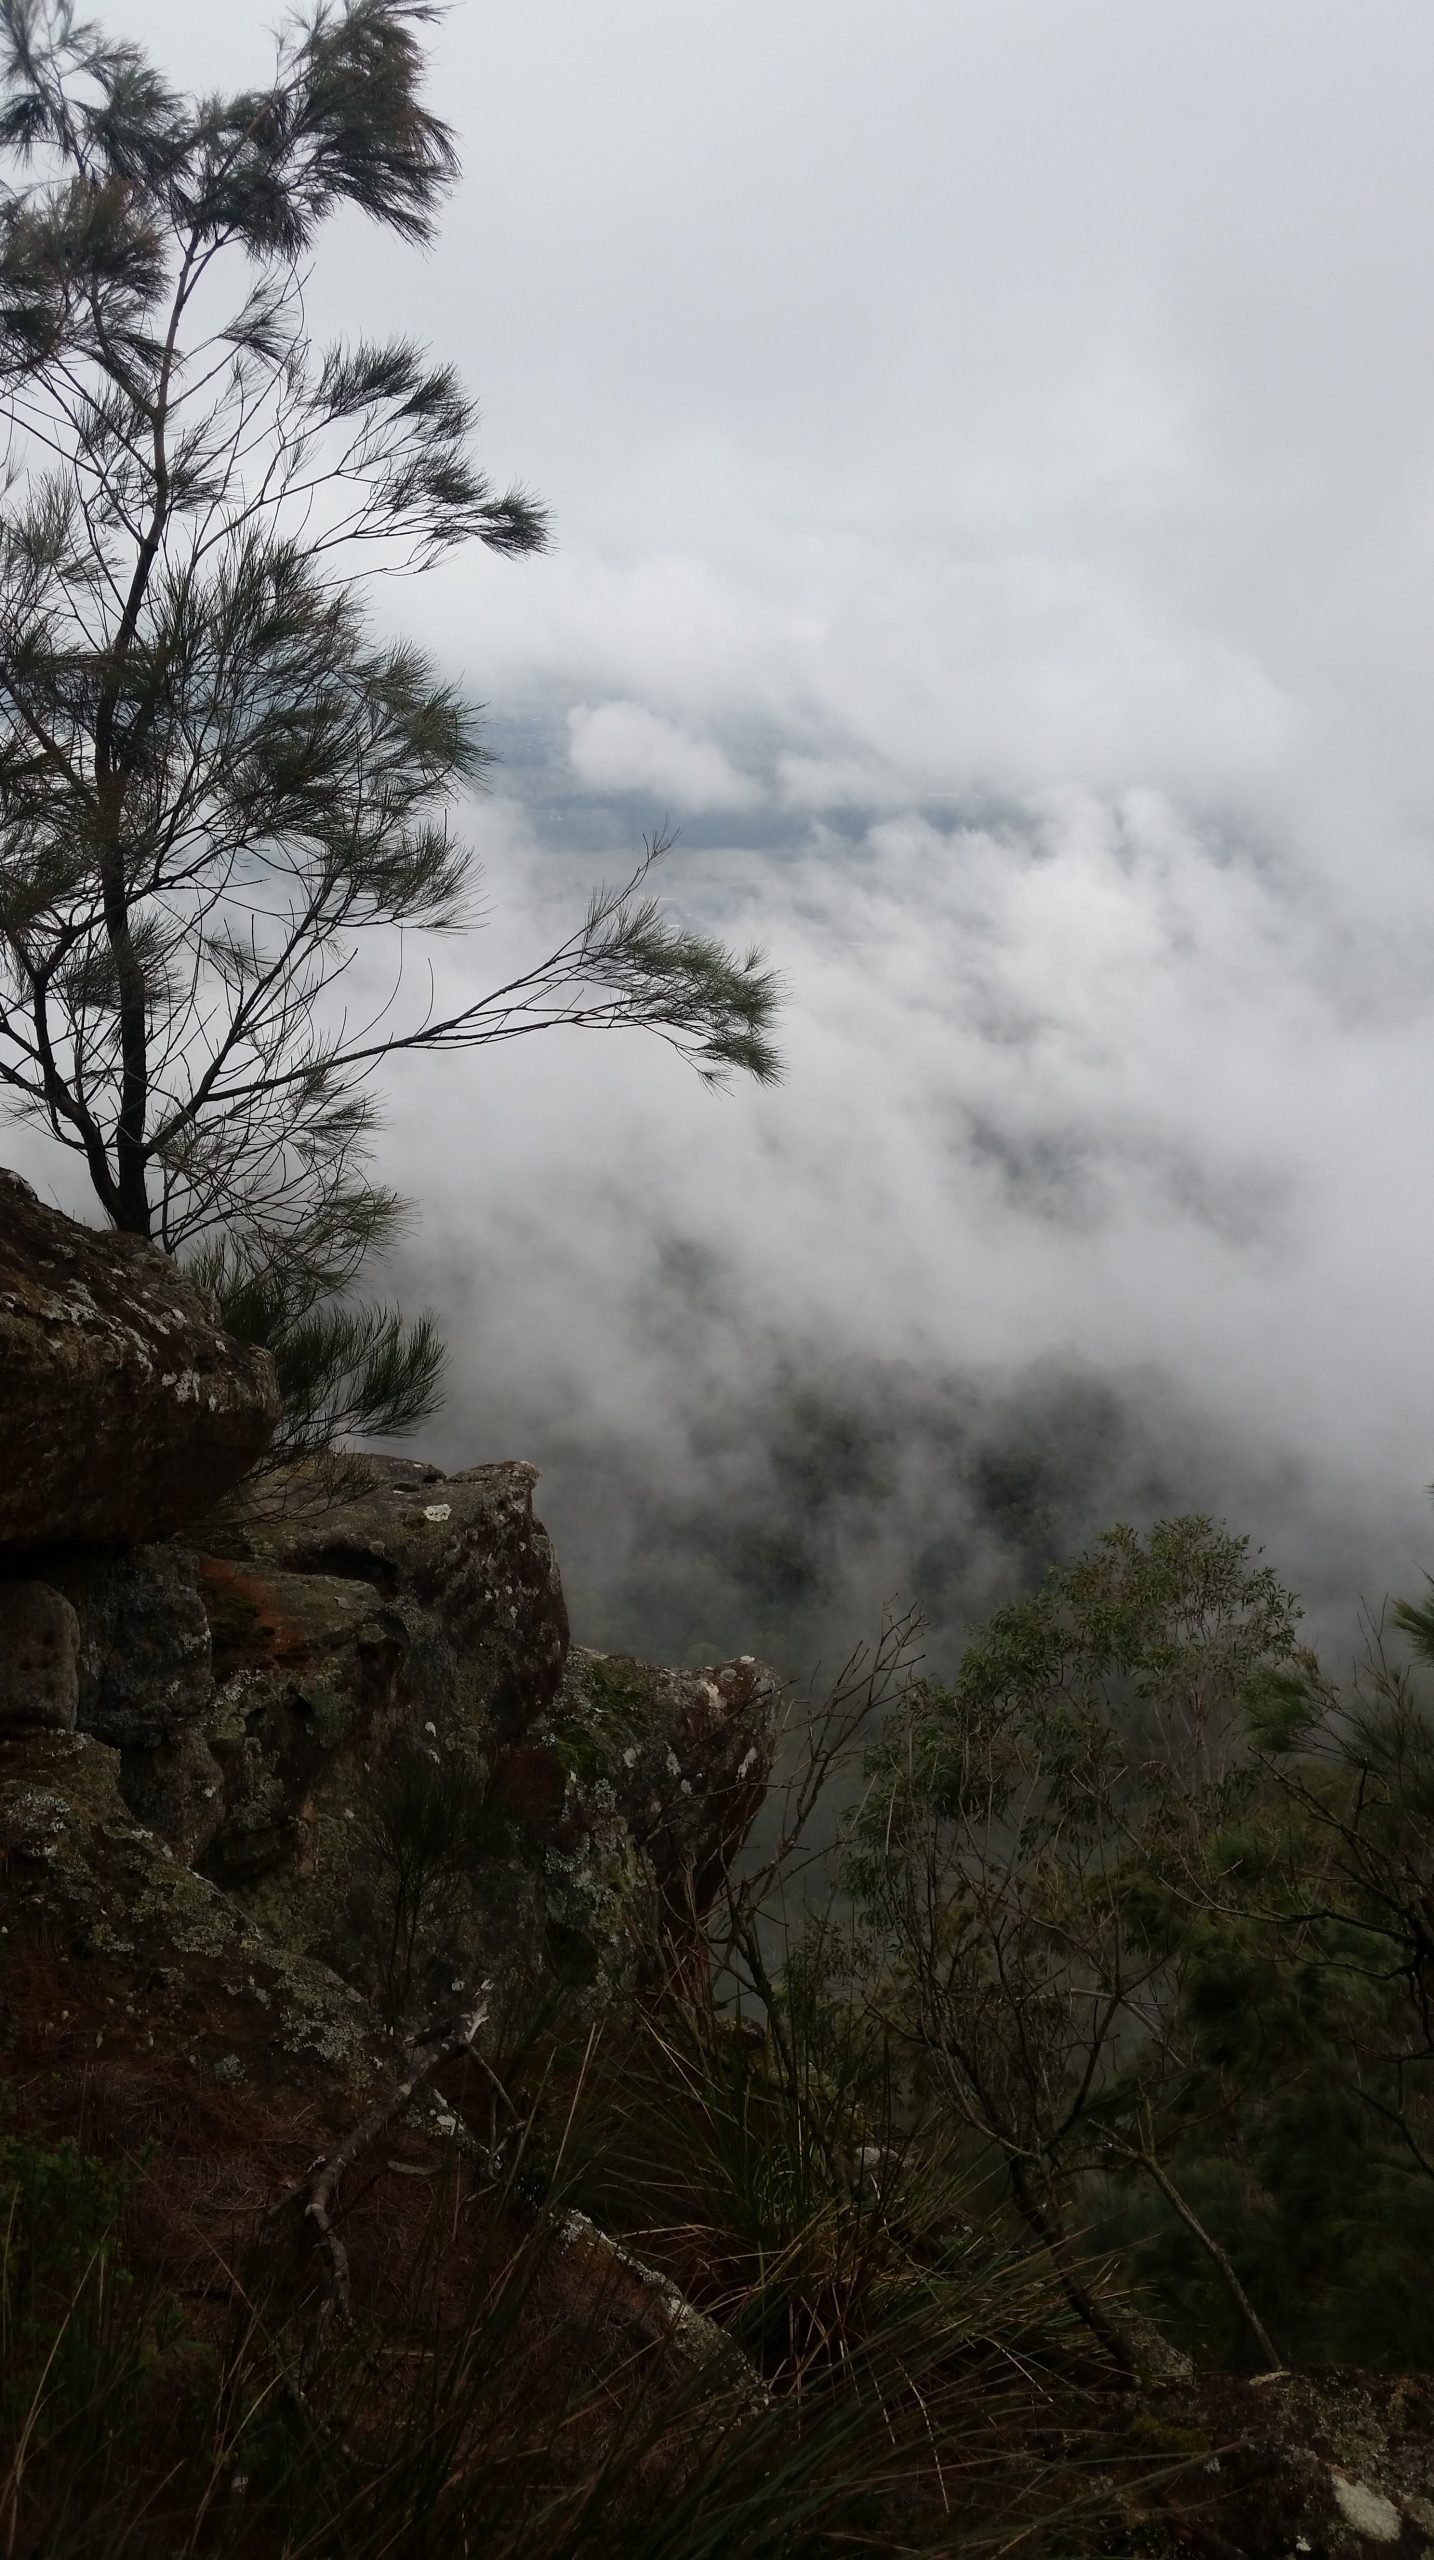 A cloudy day proves to be a spectacular walk to Mt Kembla